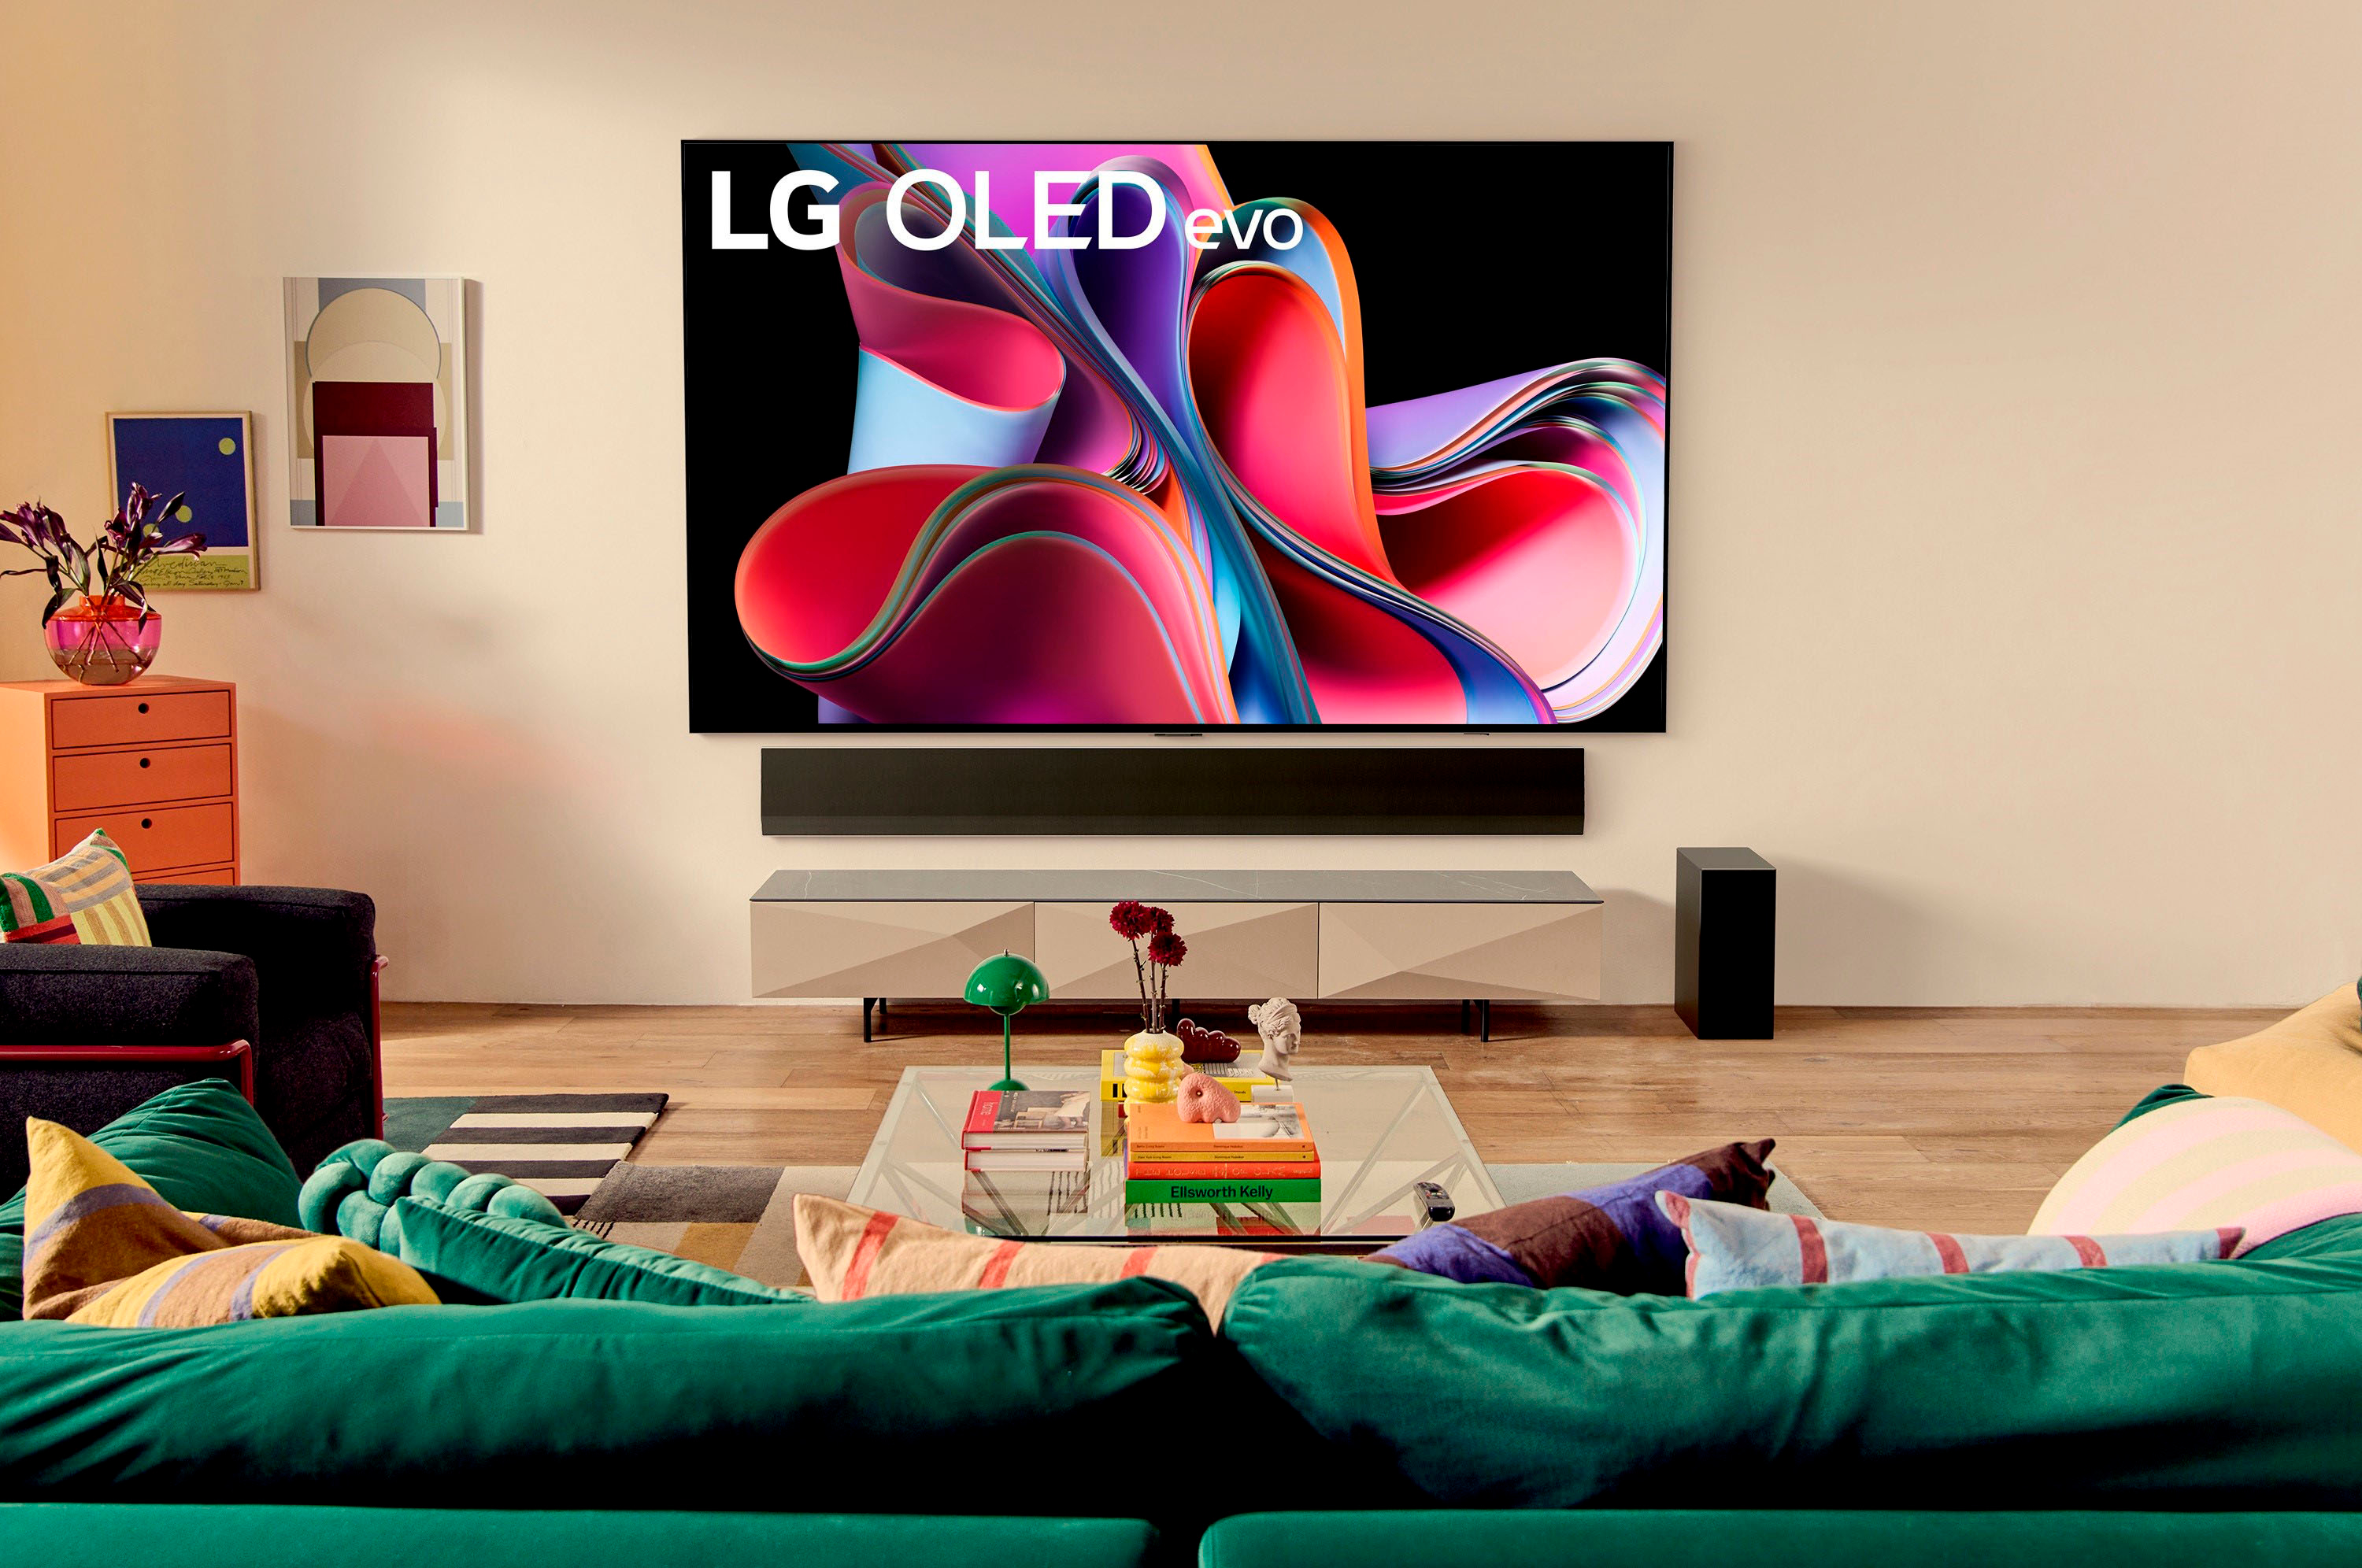 LG 83 Class G3 Series OLED 4K UHD Smart webOS TV with One Wall Design  OLED83G3PUA - Best Buy